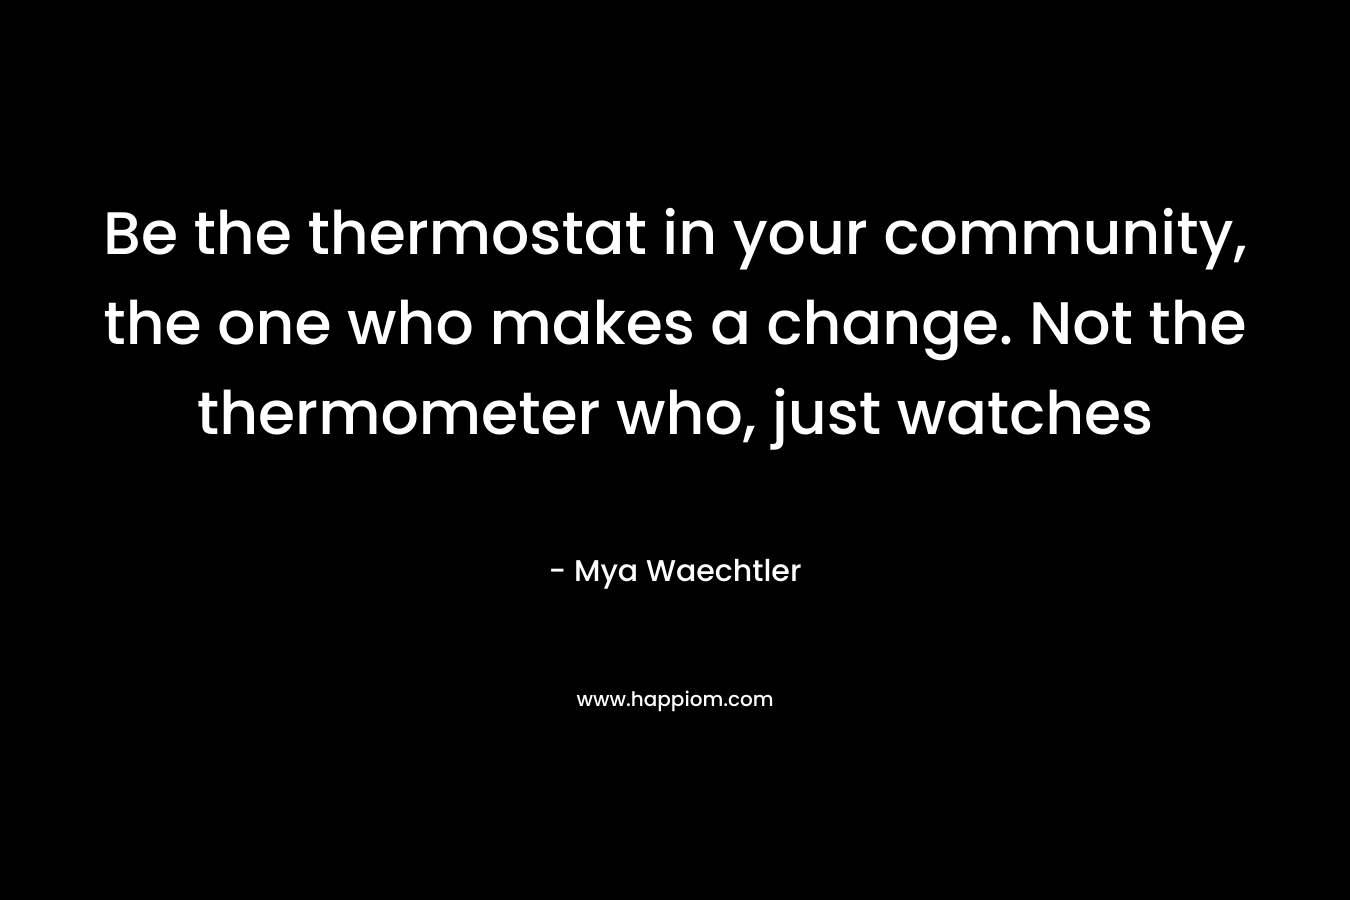 Be the thermostat in your community, the one who makes a change. Not the thermometer who, just watches